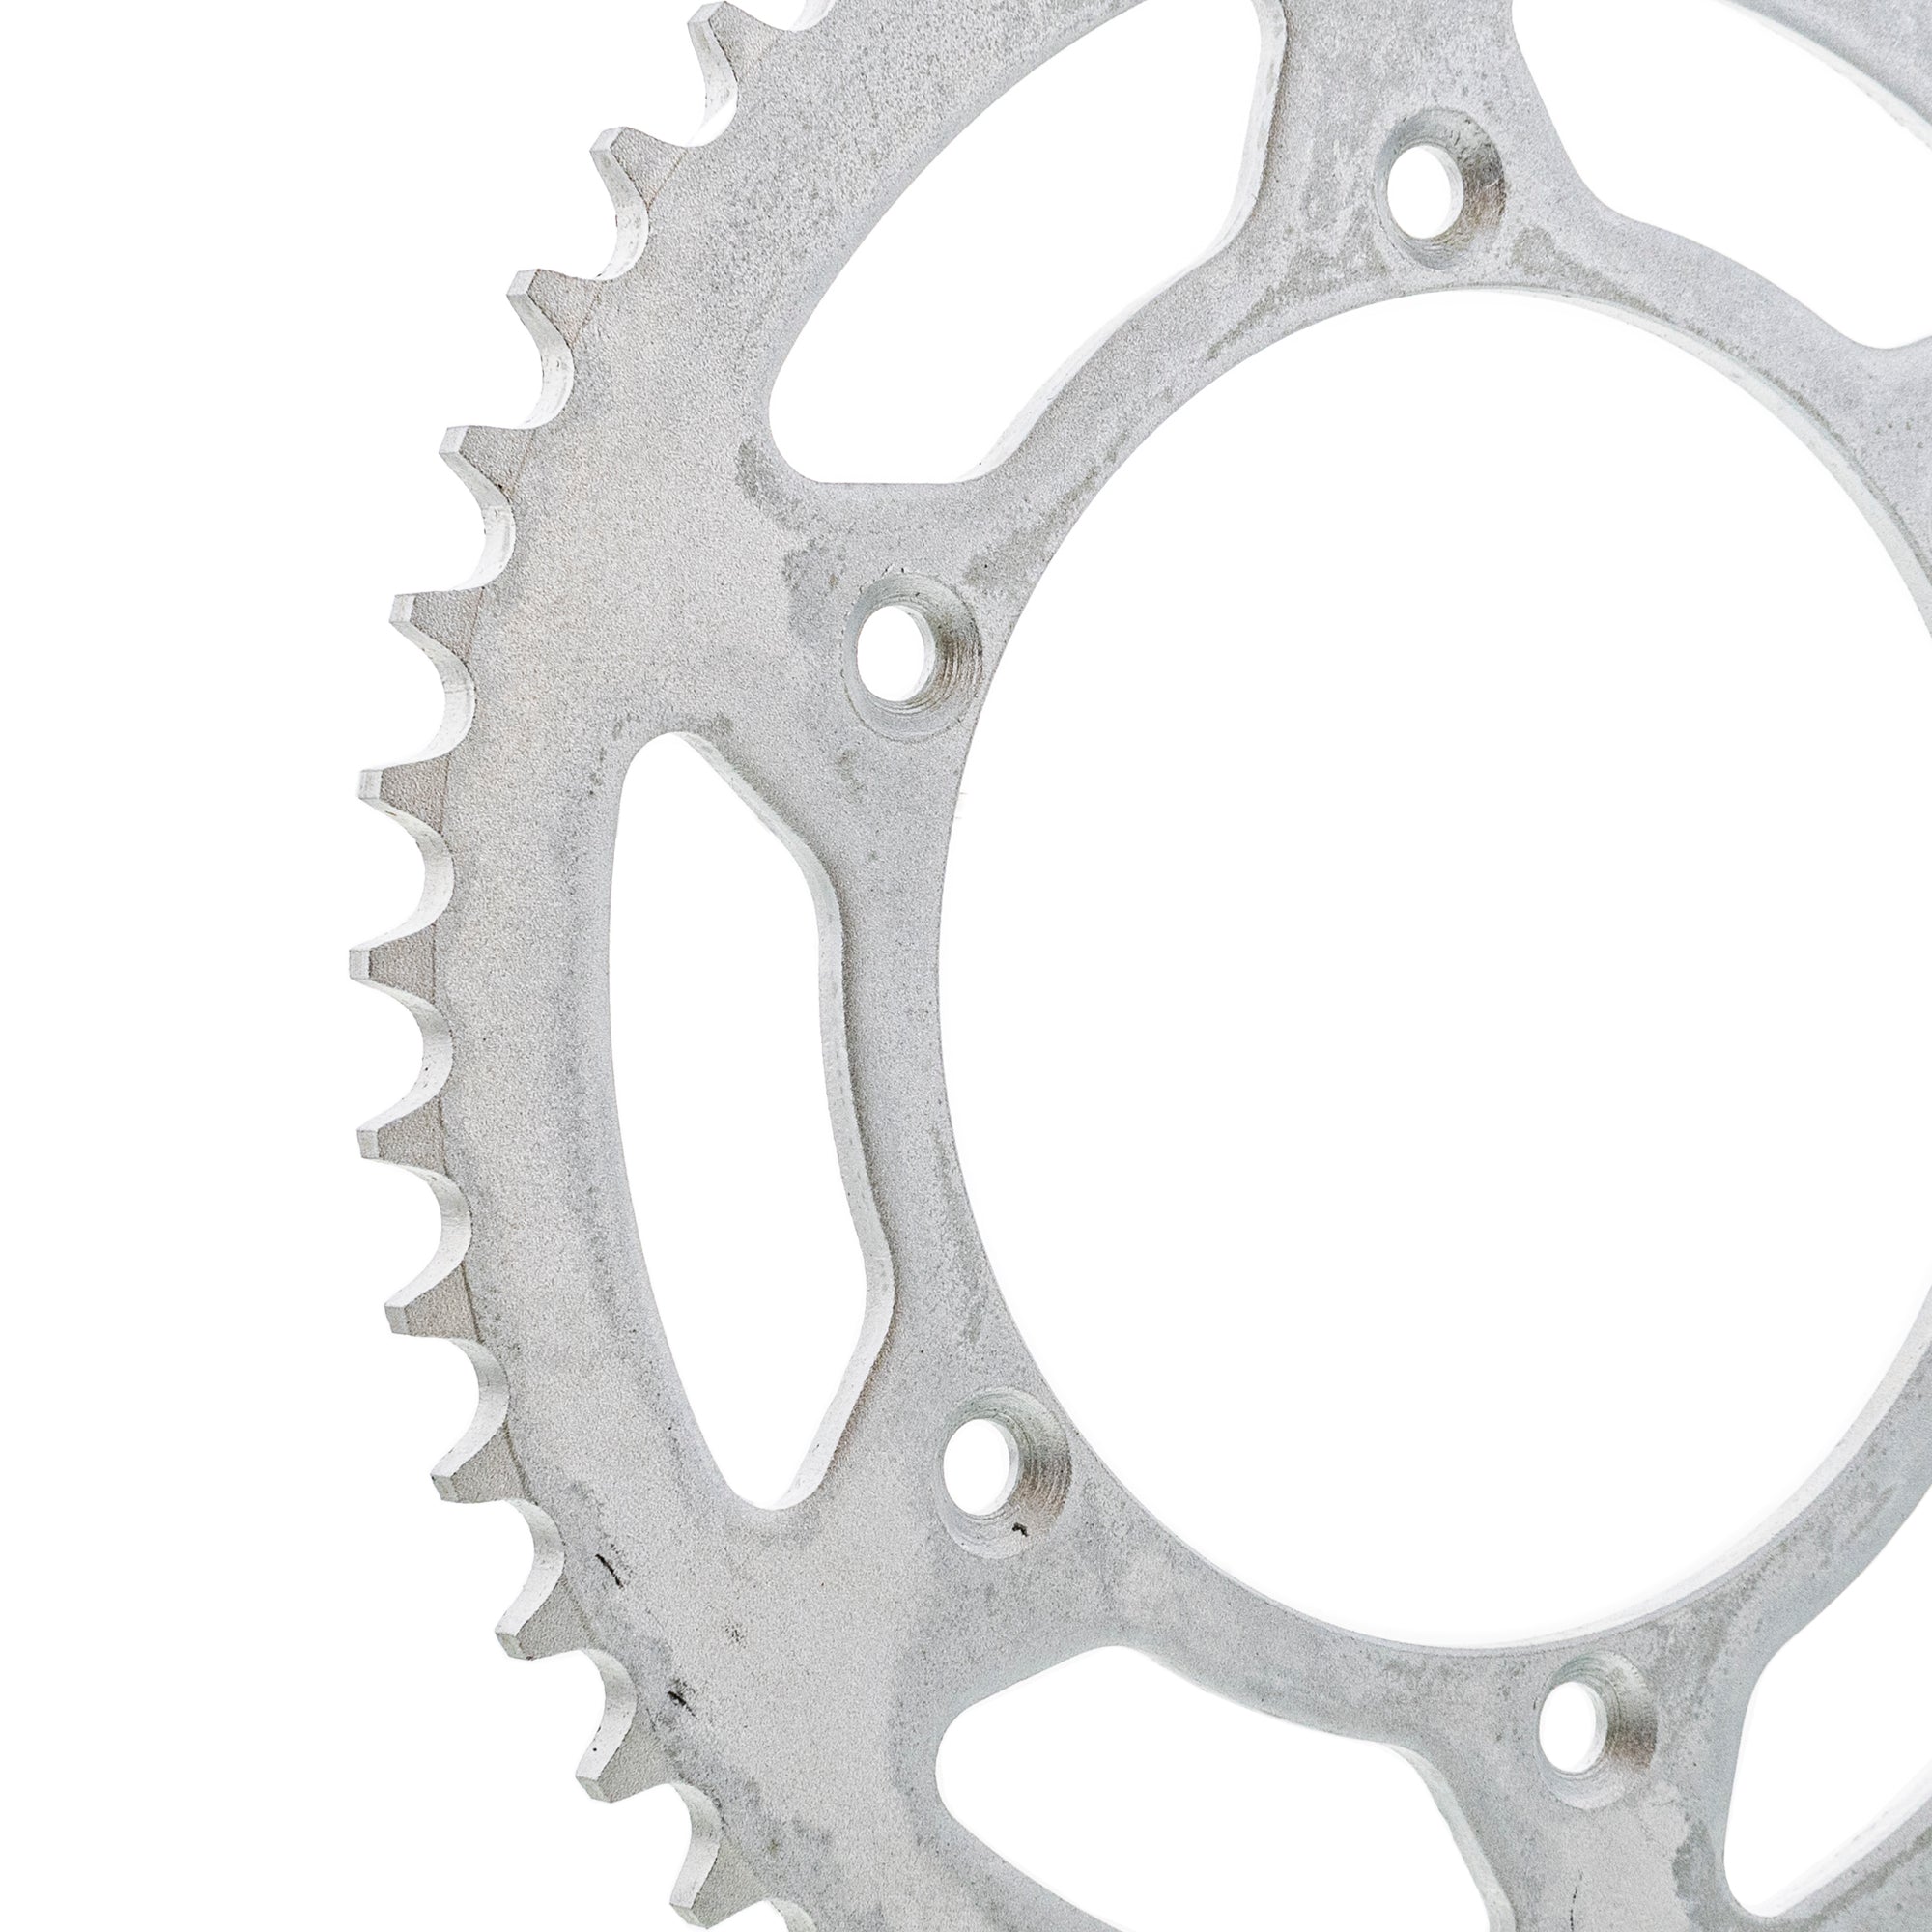 520 Pitch 50 Tooth Rear Drive Sprocket for Suzuki RM250 RM400 RM370